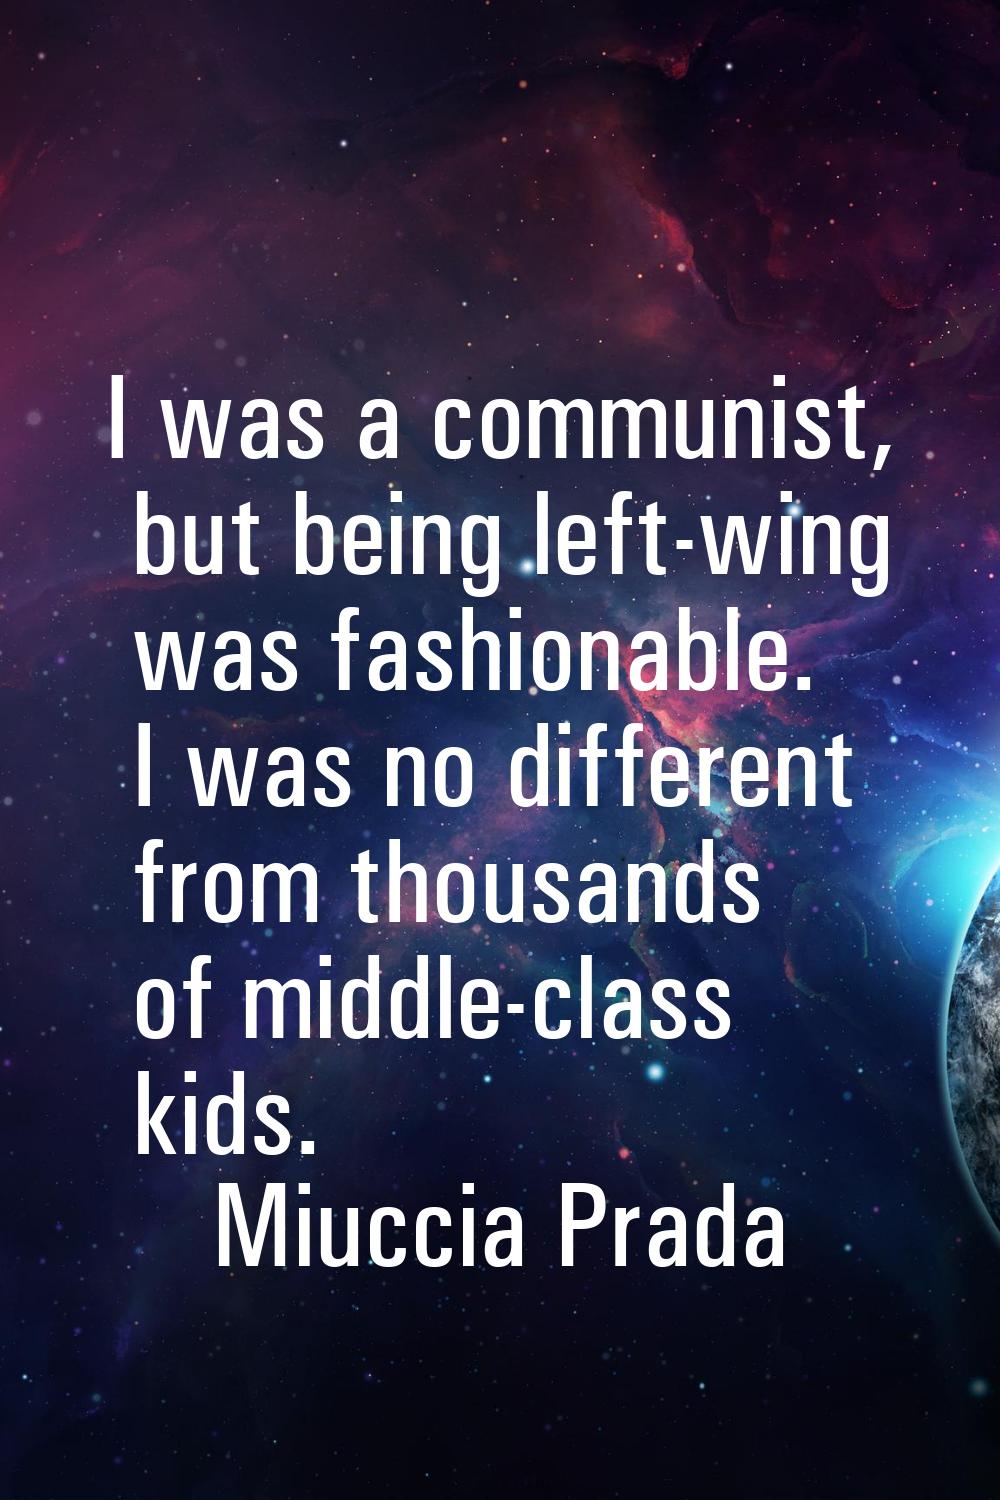 I was a communist, but being left-wing was fashionable. I was no different from thousands of middle